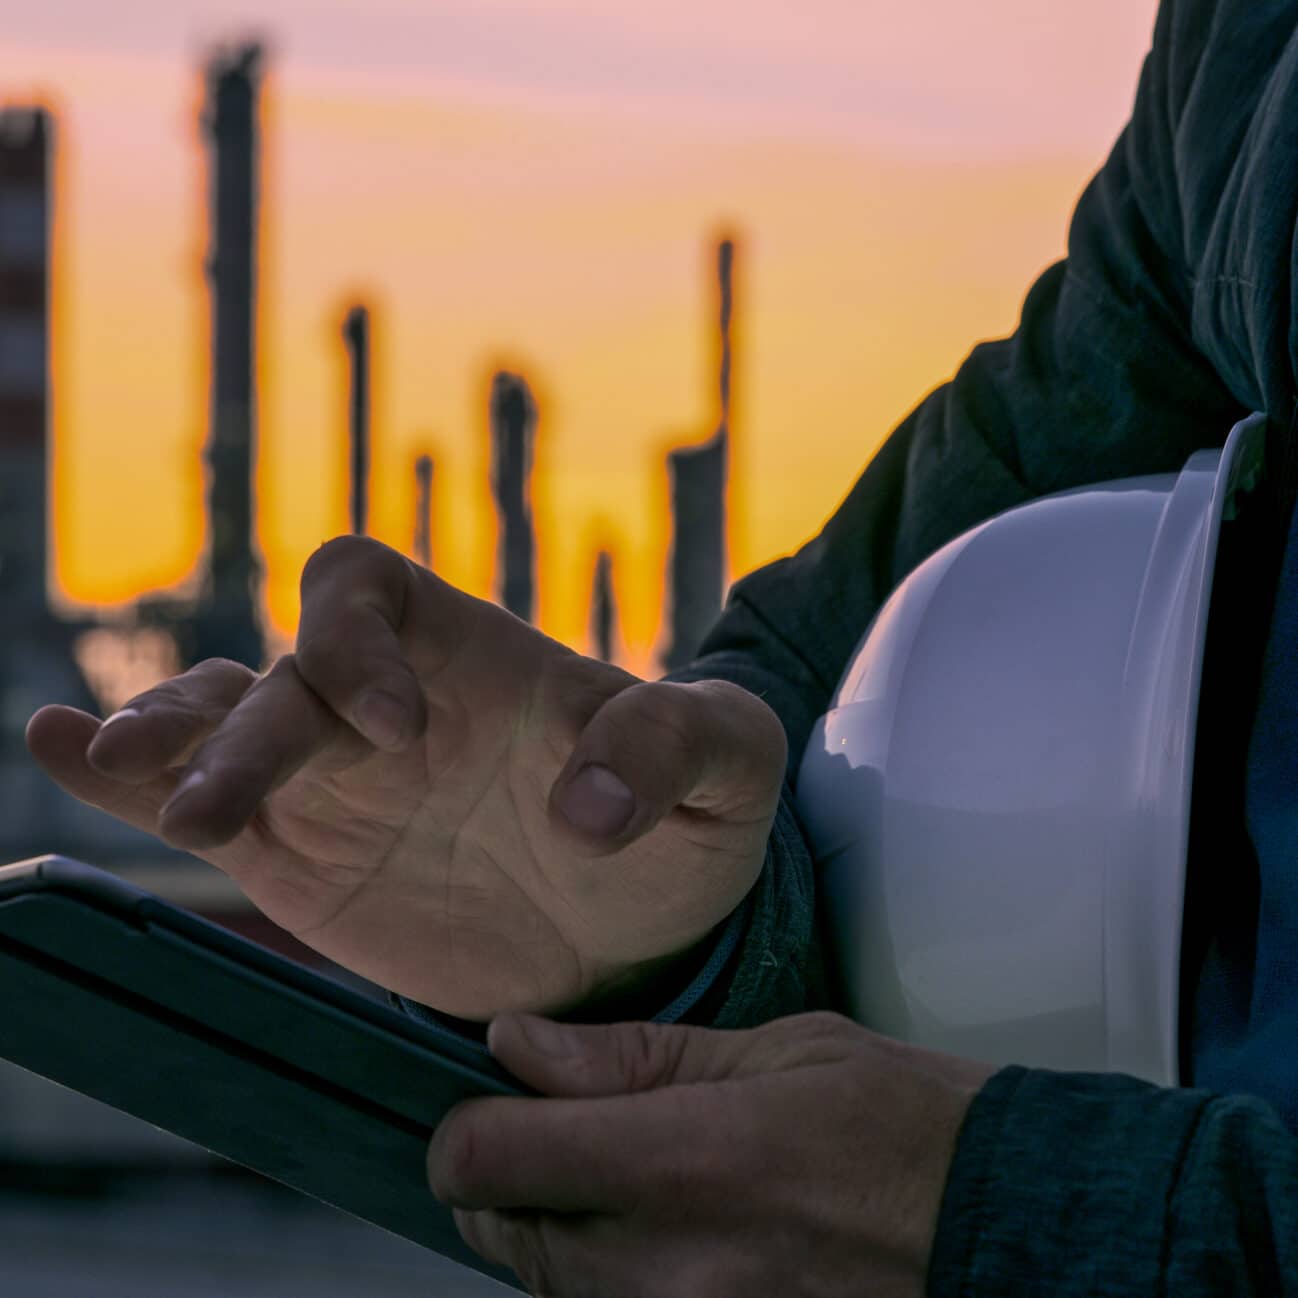 Close-up shot of the hands an engineer with a white hardhat using a tablet with an oil refinery visible in the background during sunset.